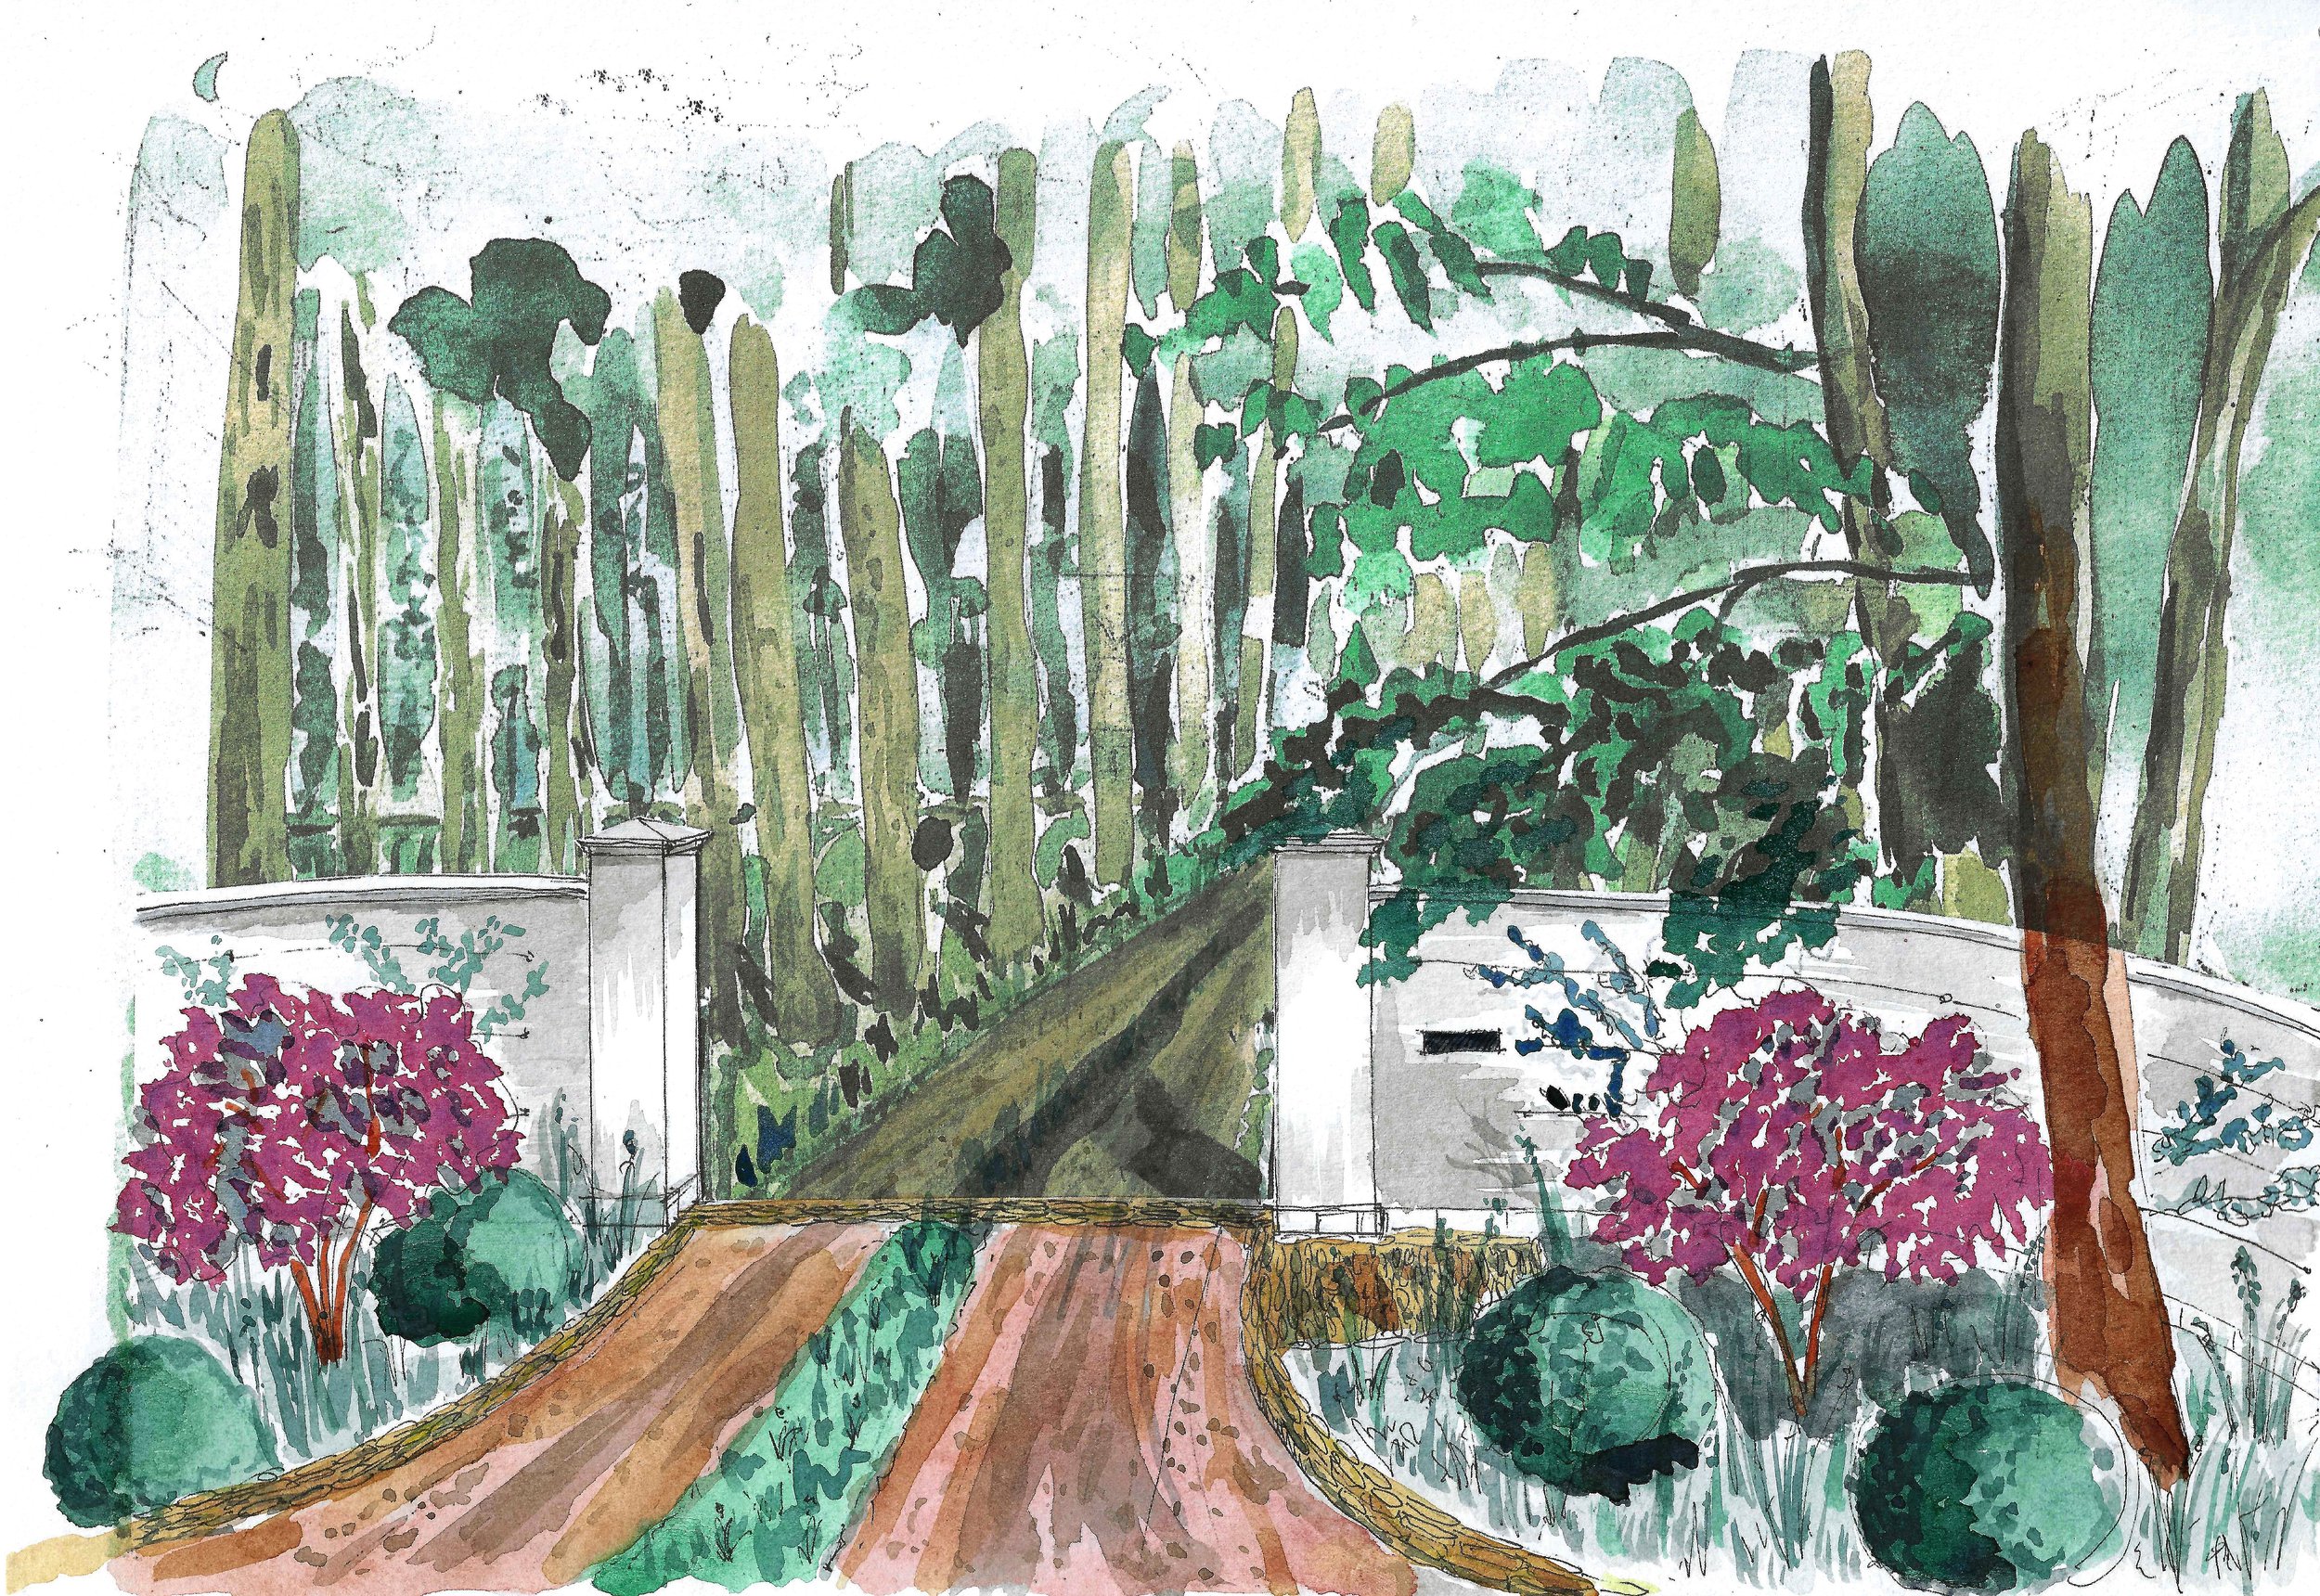 Entrance - as proposed  planted.jpg